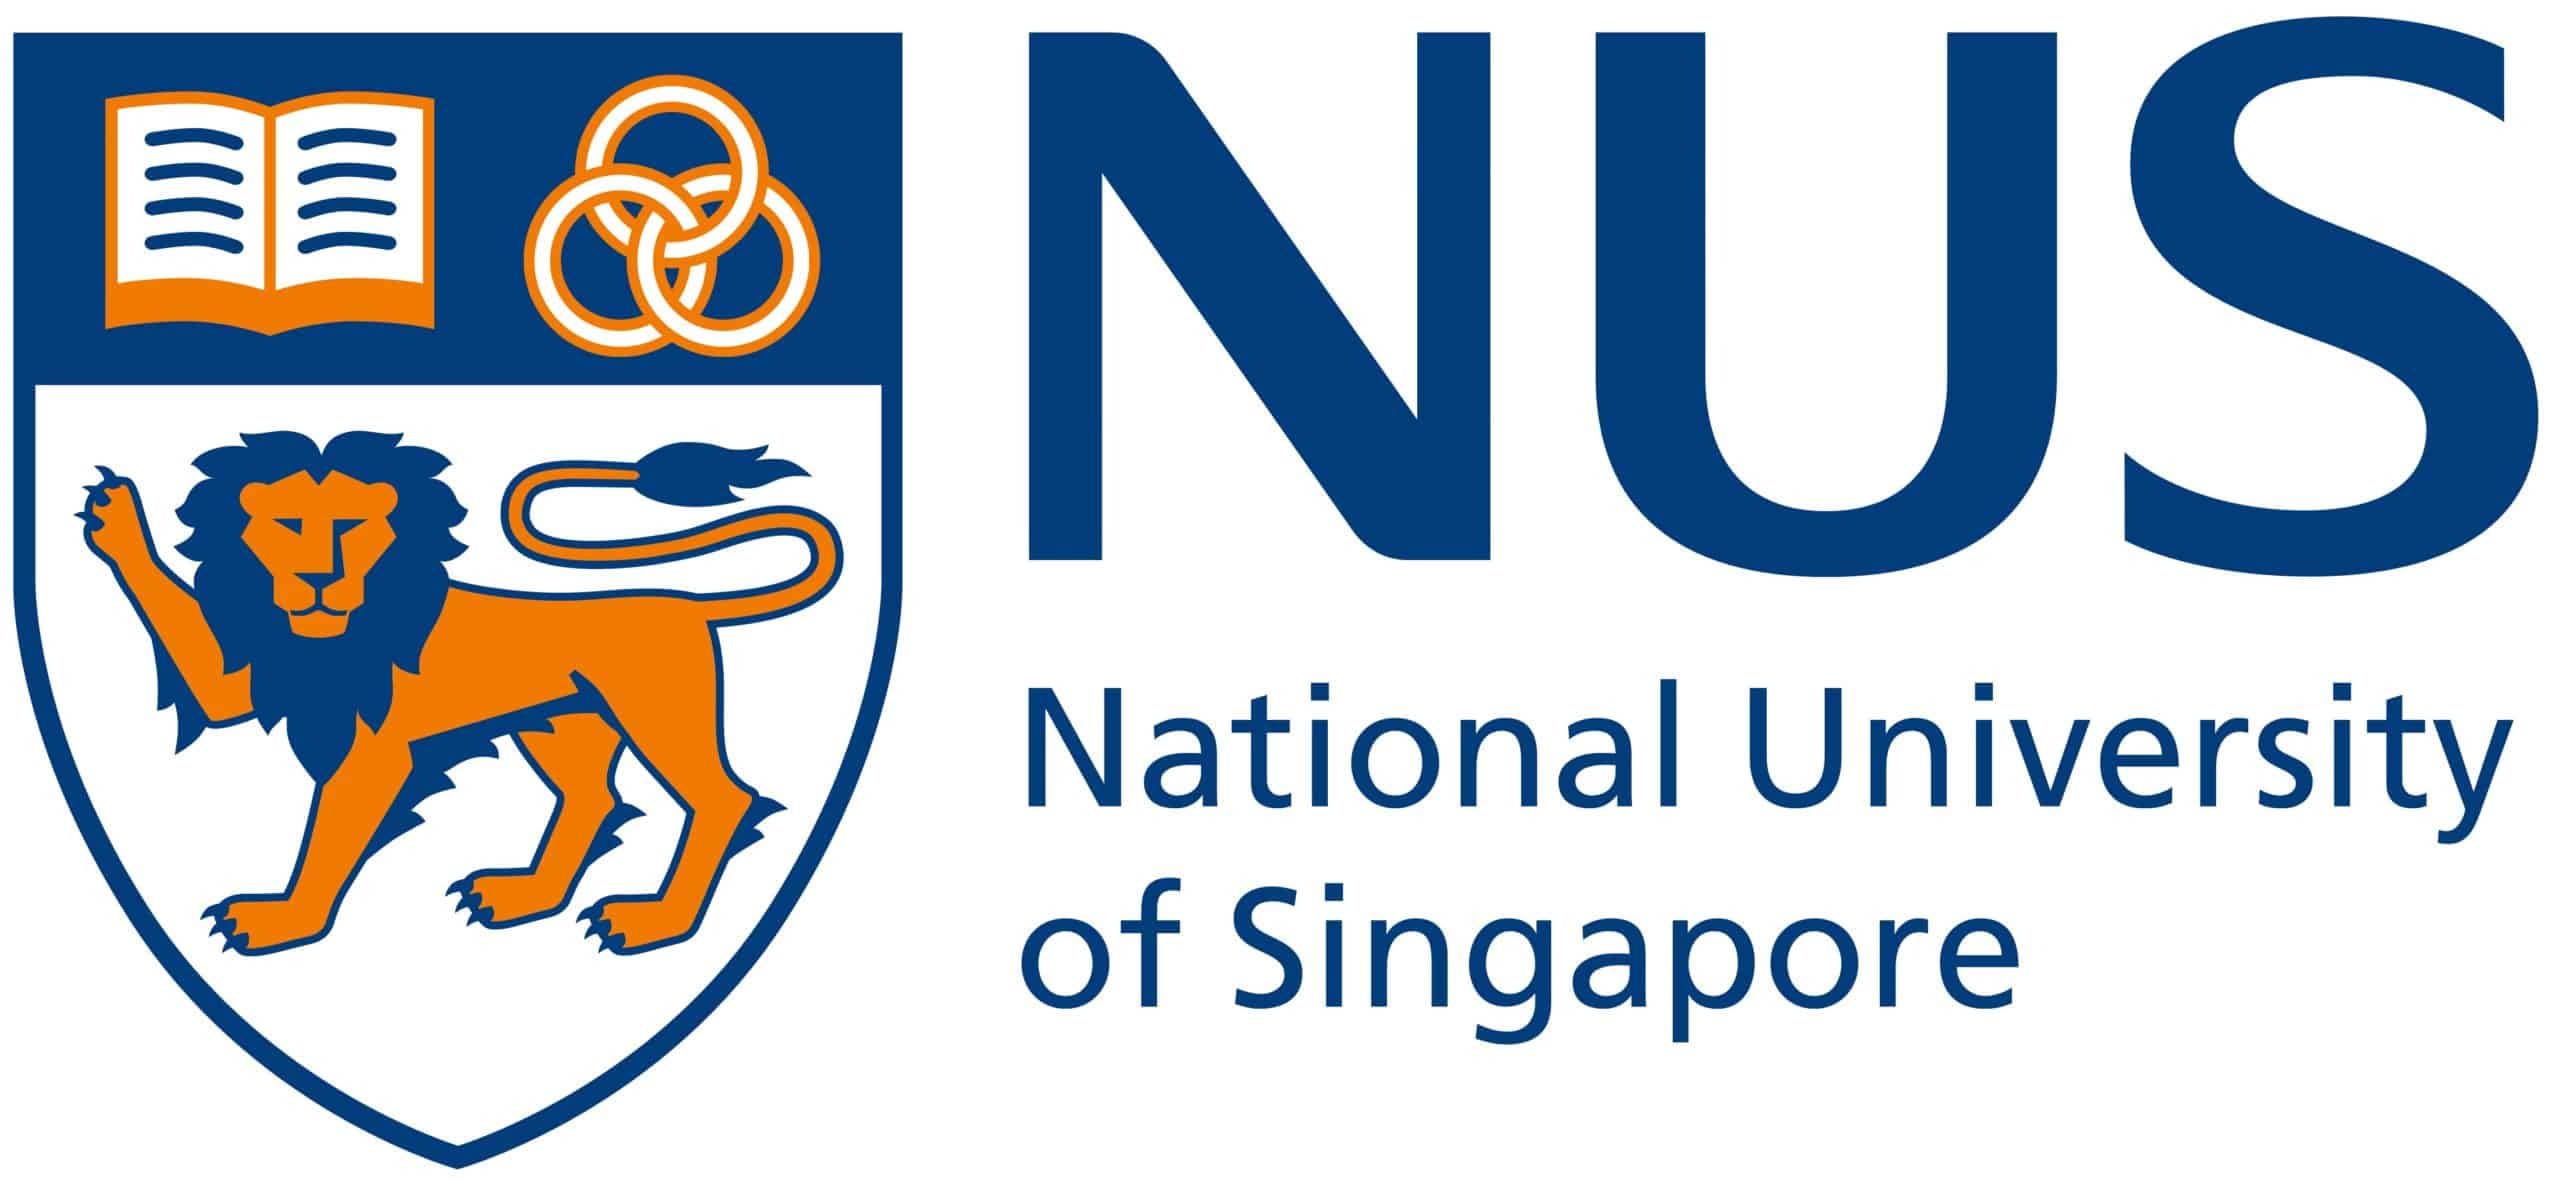 Logo for the National University of Singapore - a crest shows an open book, 3 linked rings and an orange lion.